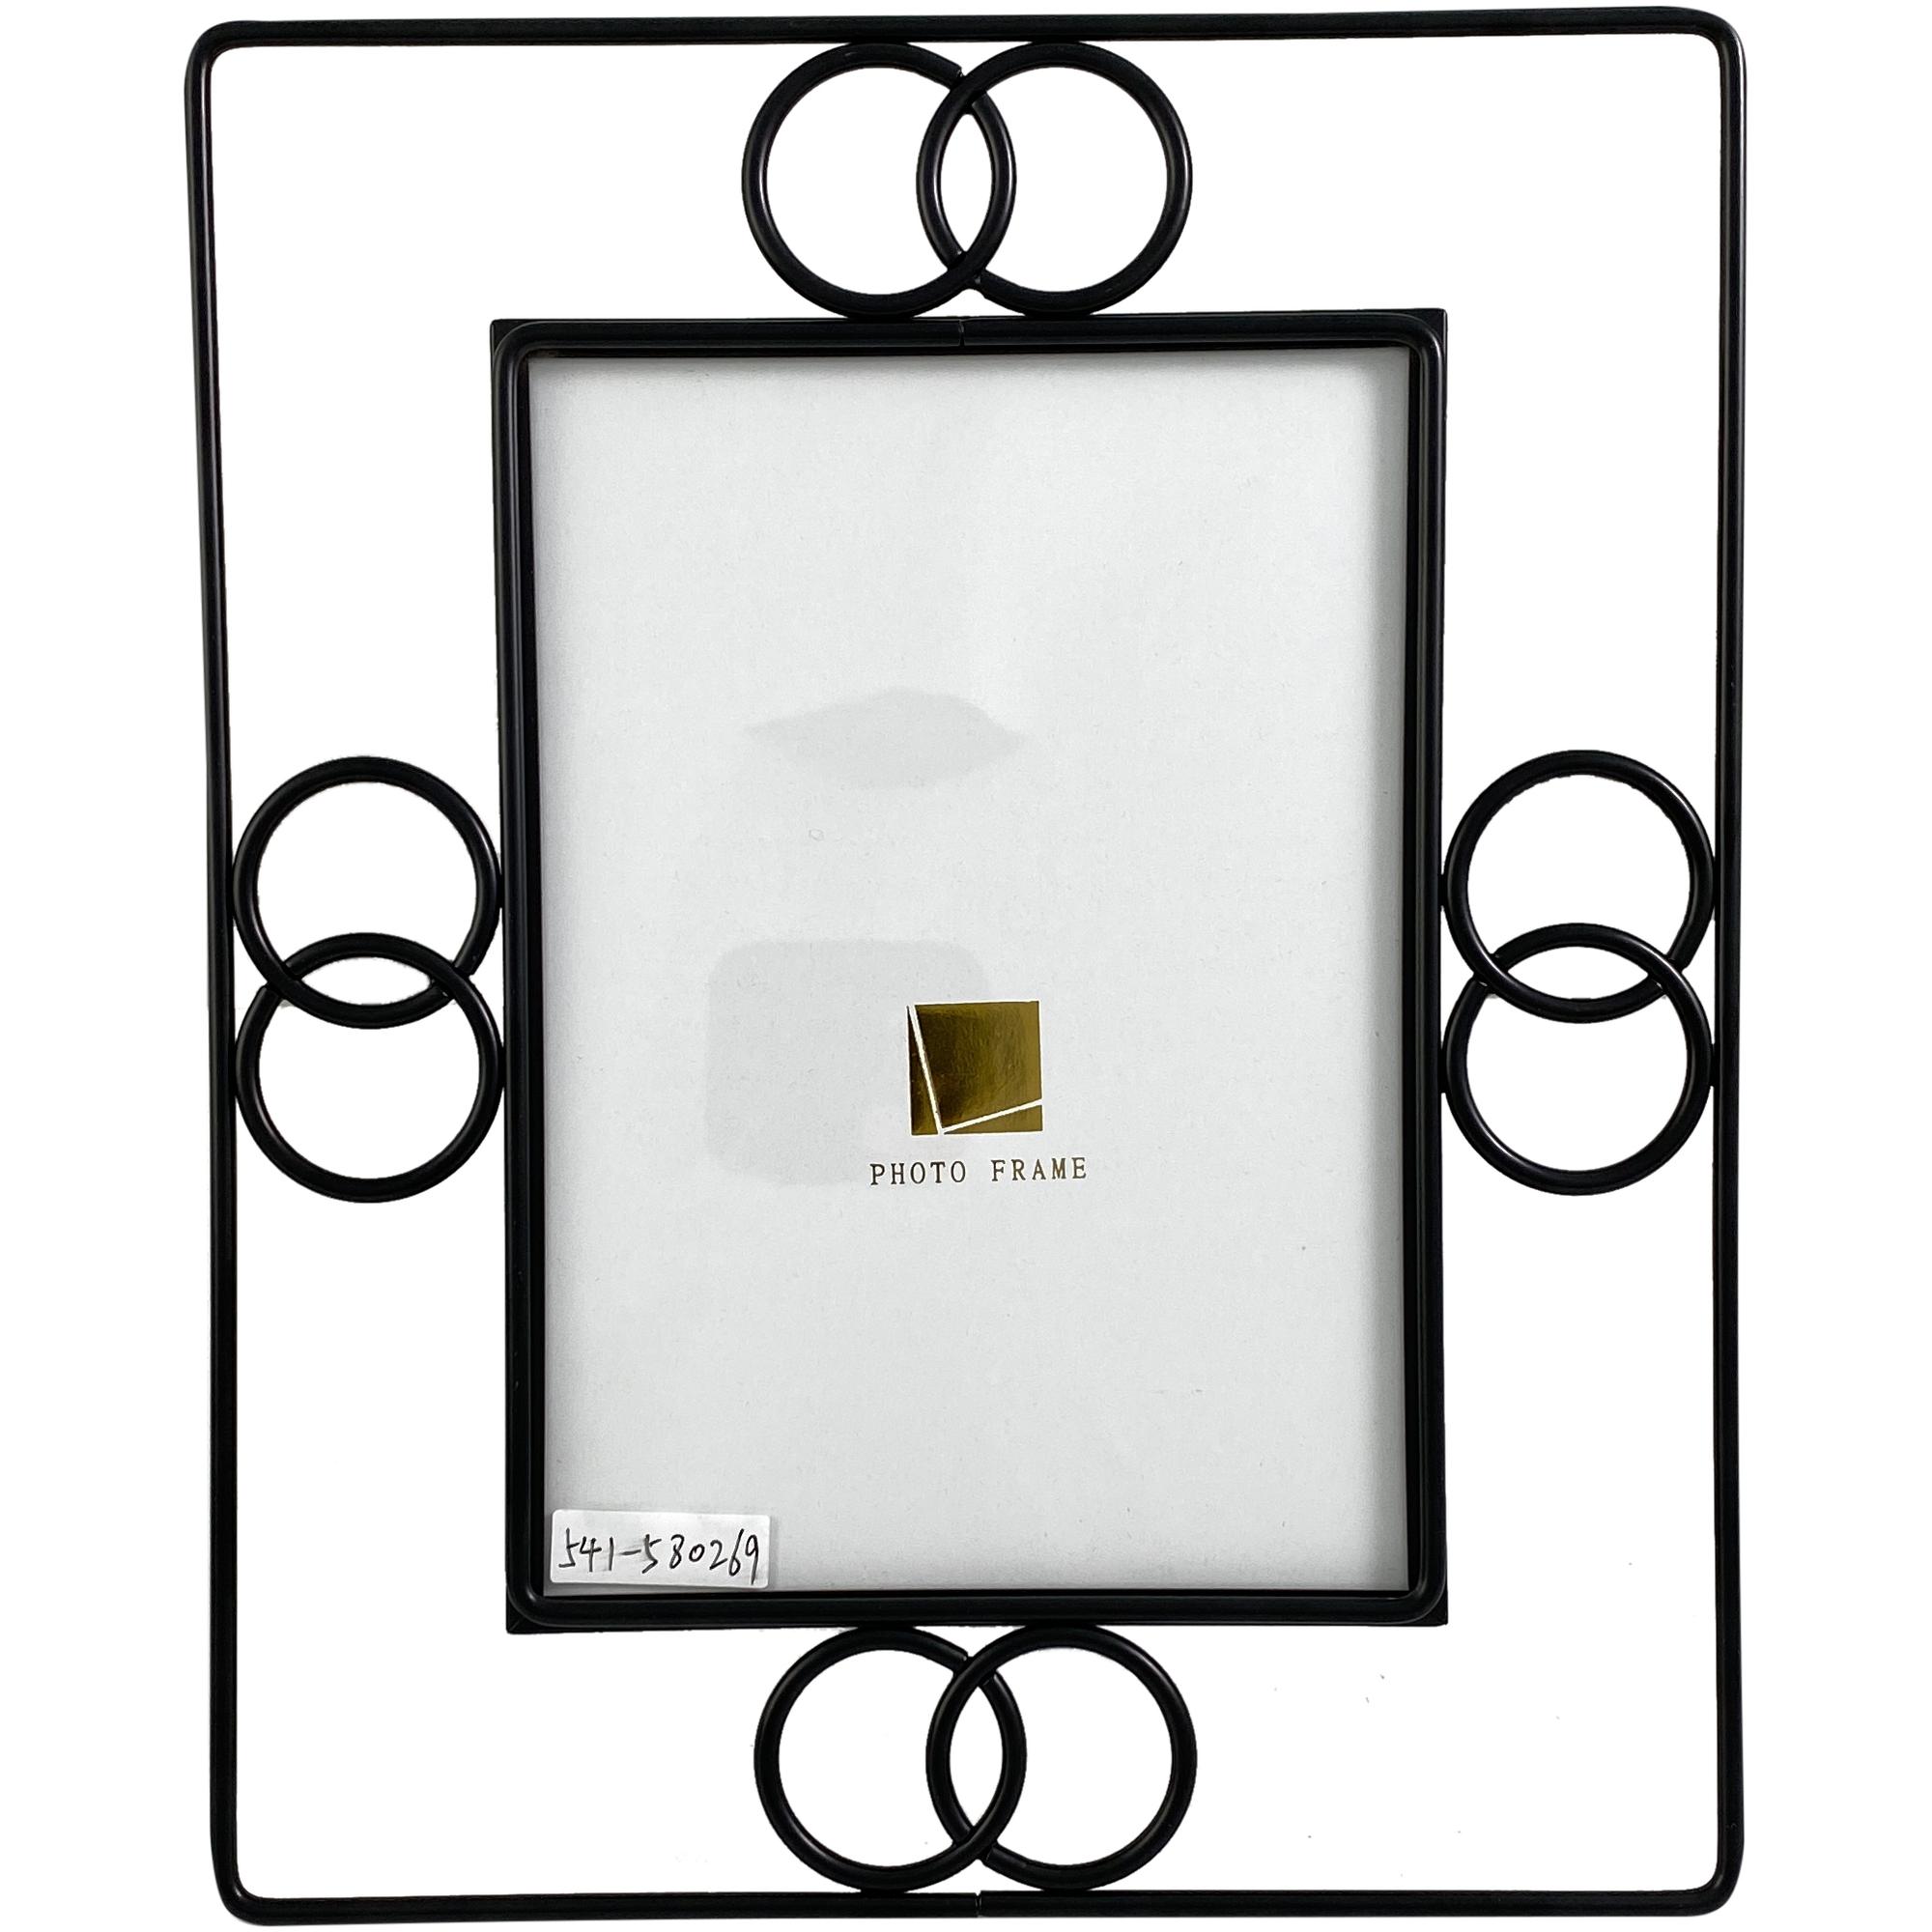 PICTURE FRAME 5 X 7 21 X 25.8 X 2 CM - 541-580269